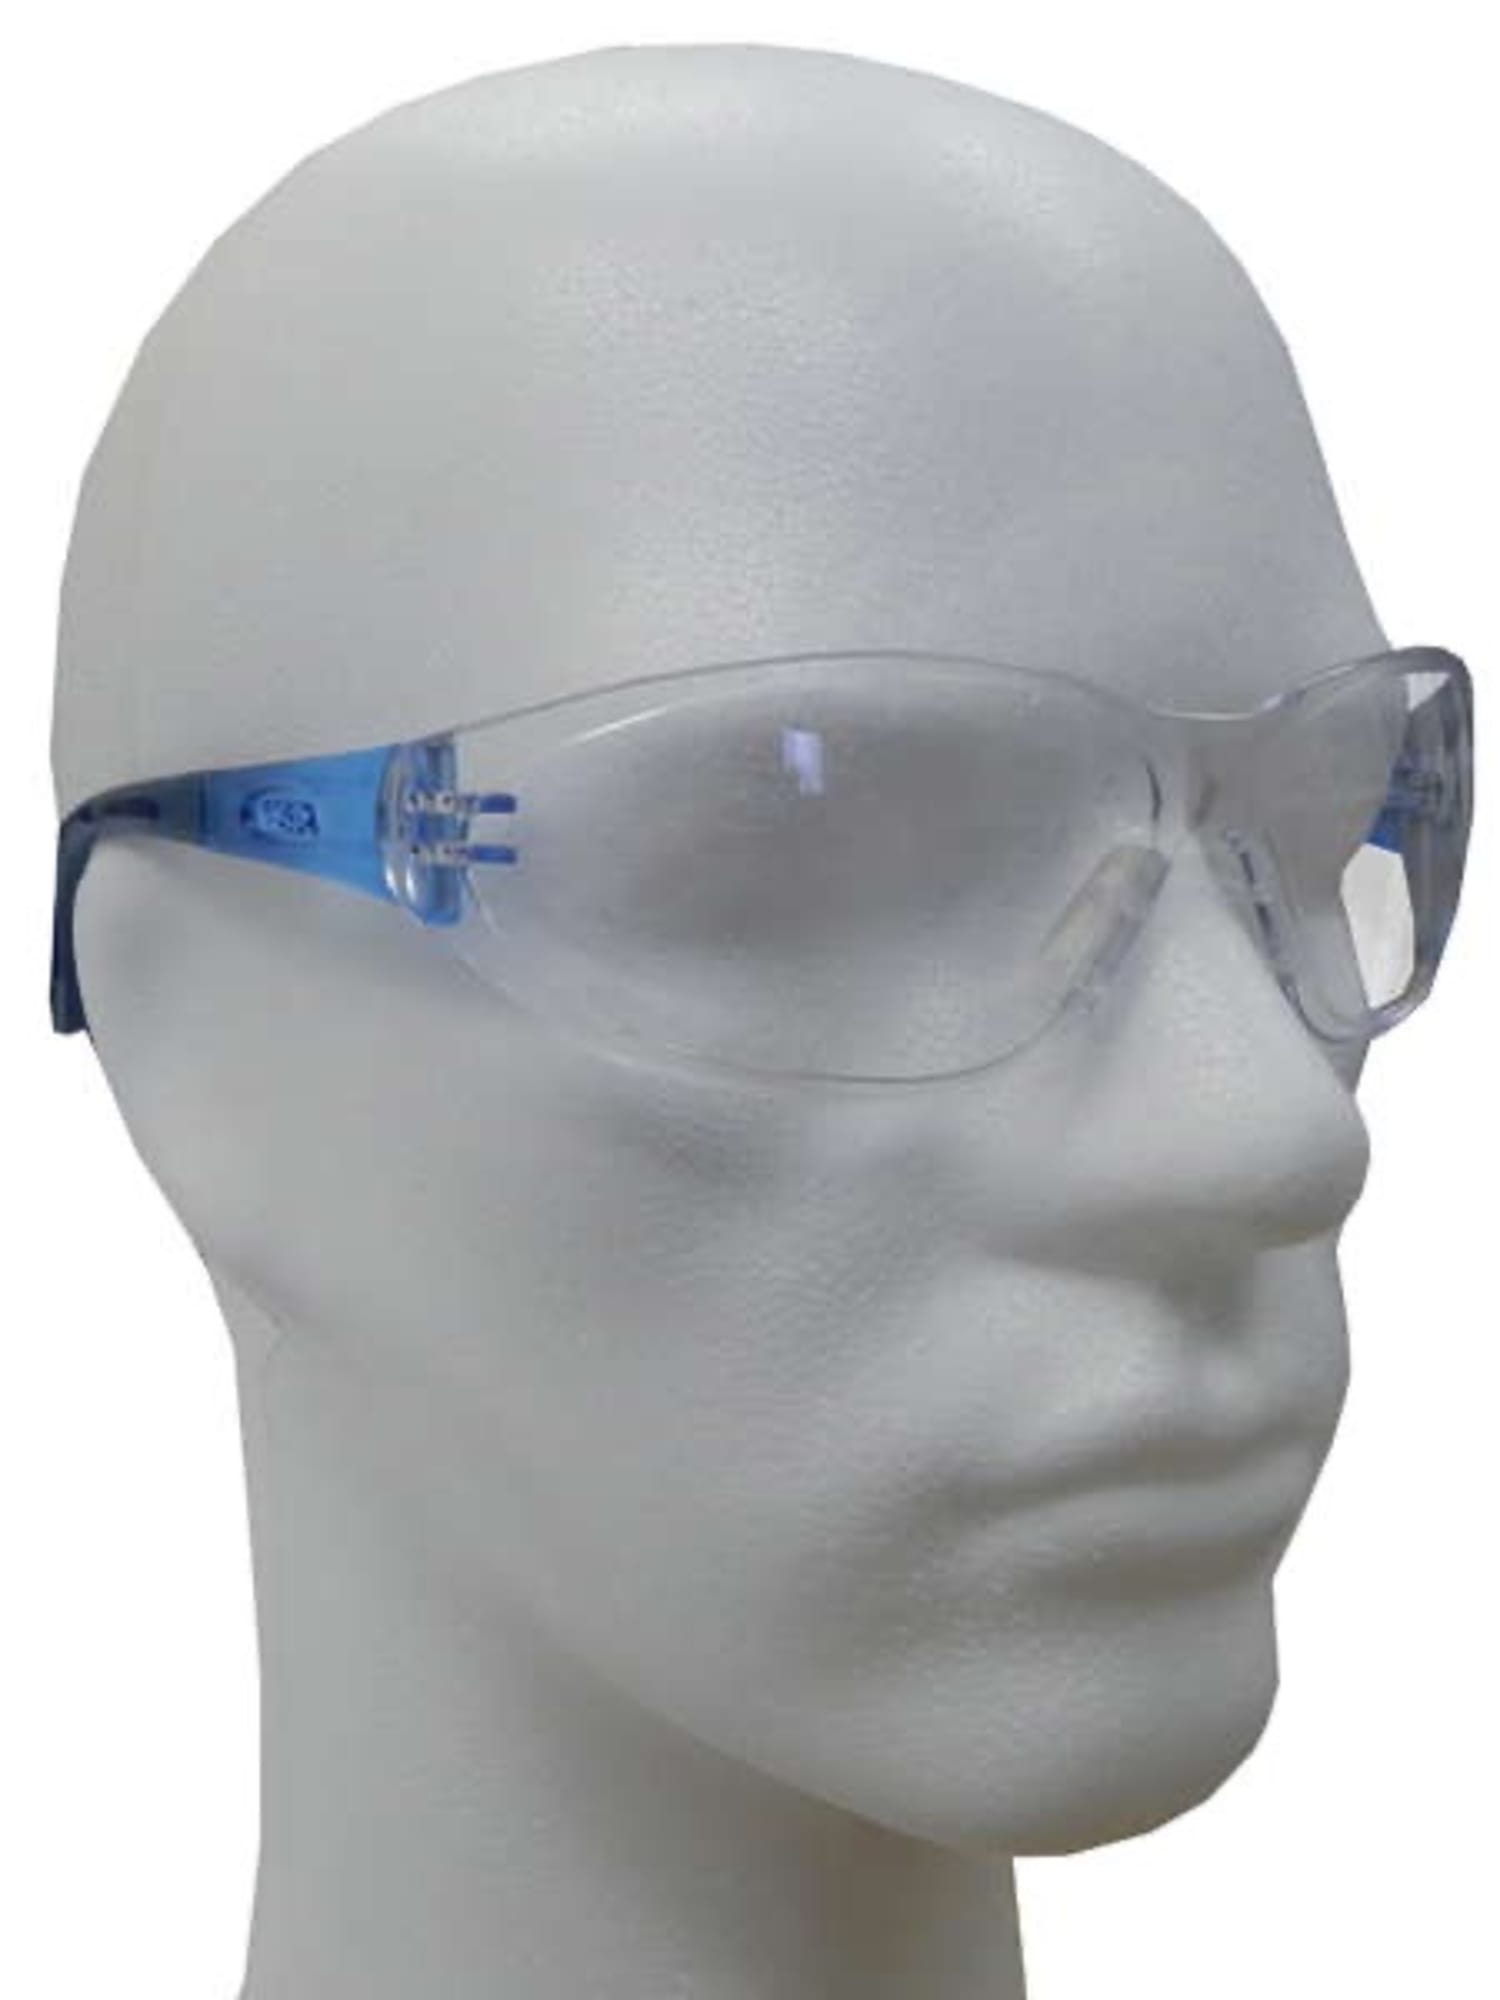 Designer Protection googles Perspecta 9000, clear glasses